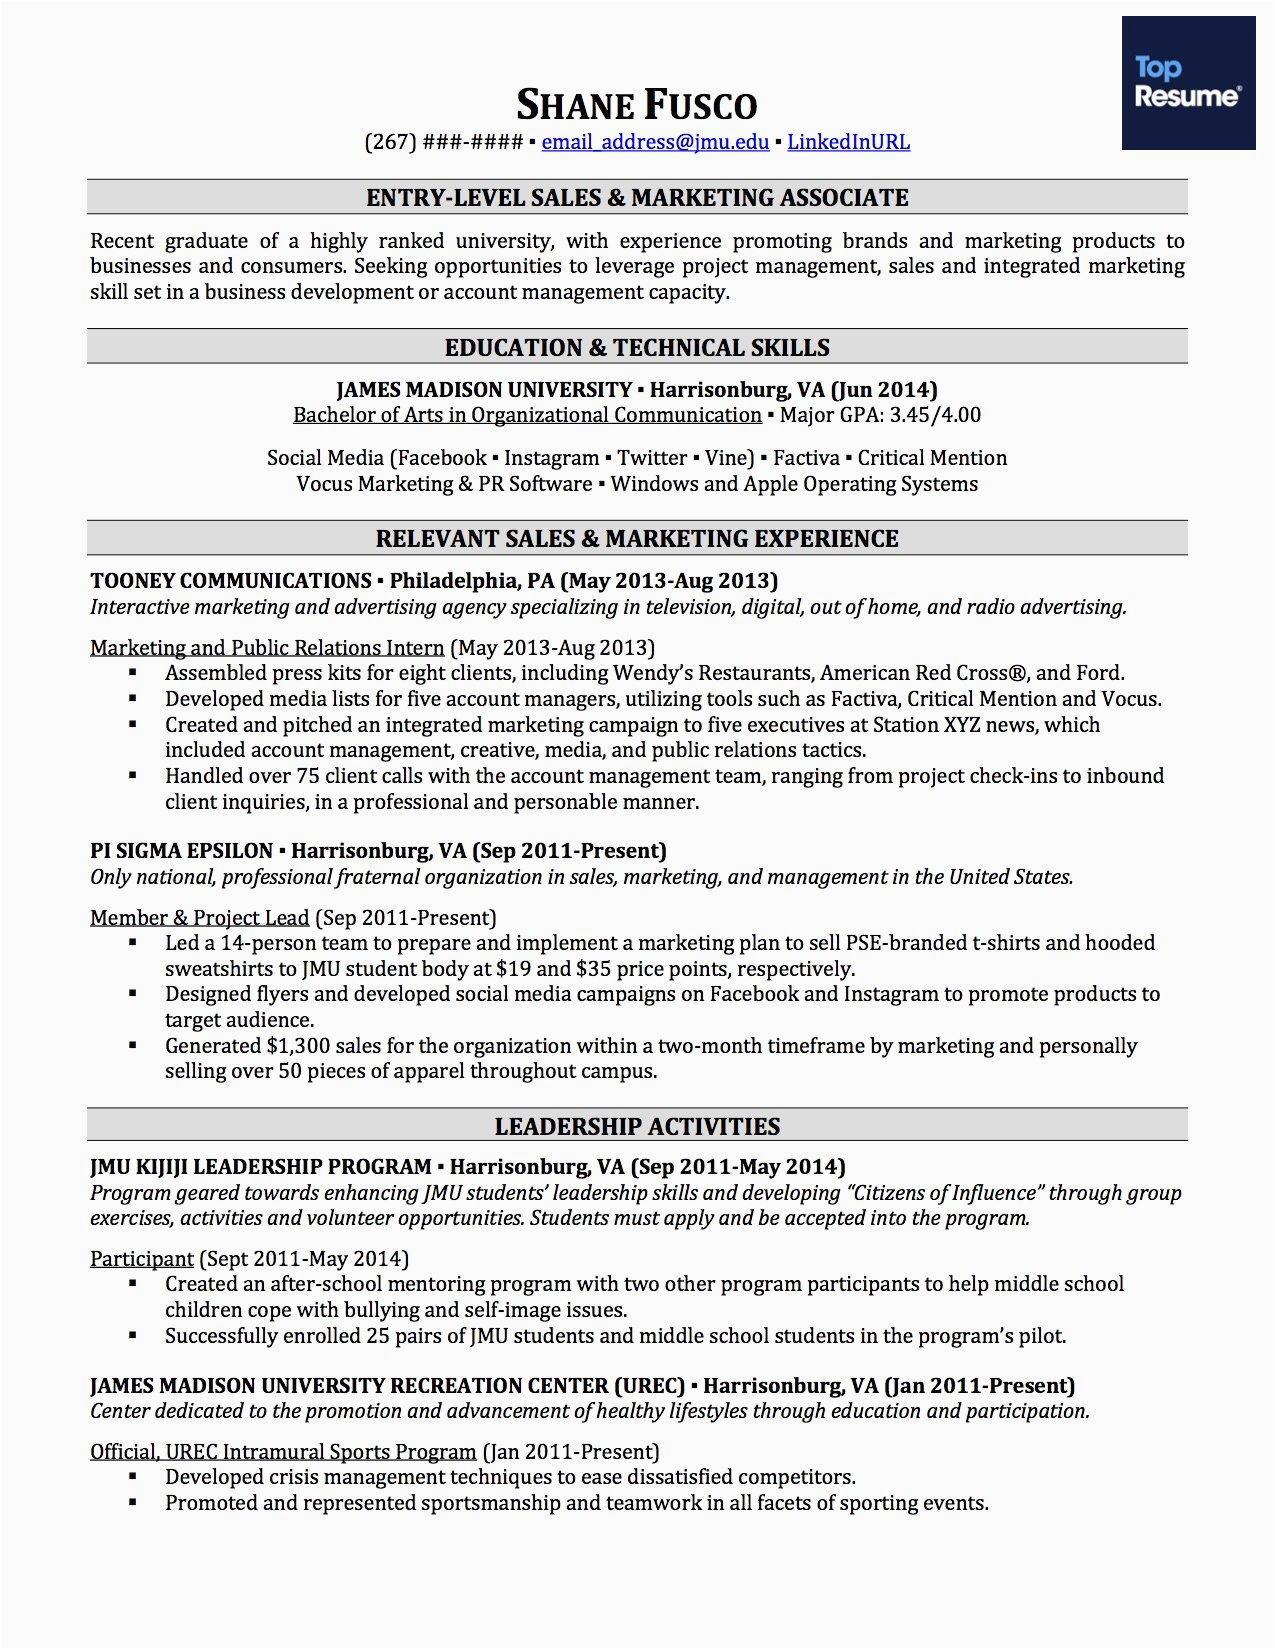 Sample Resume for social Worker with No Experience social Worker Resume with No Experience™